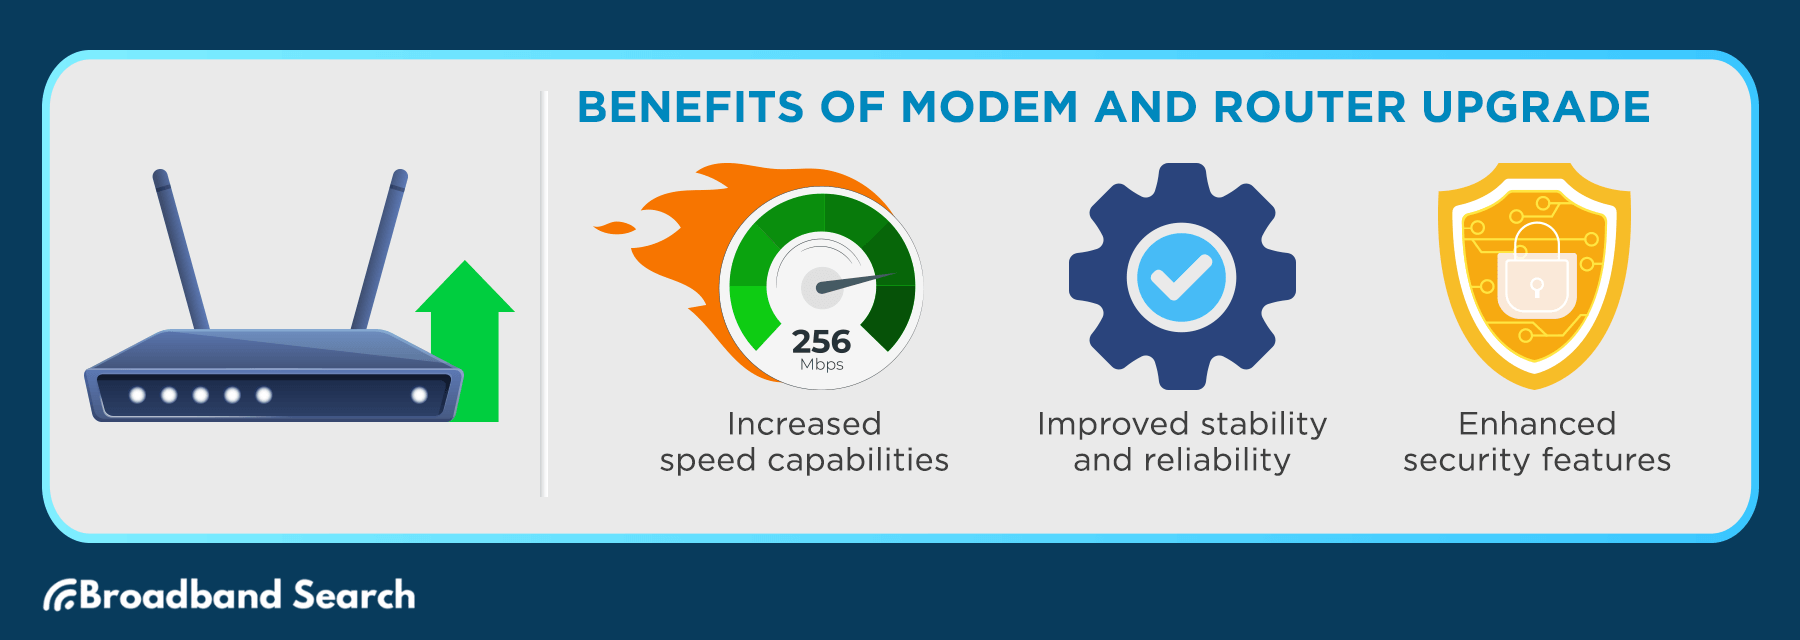 Graphic showing benefits of Modem and Router Upgrade